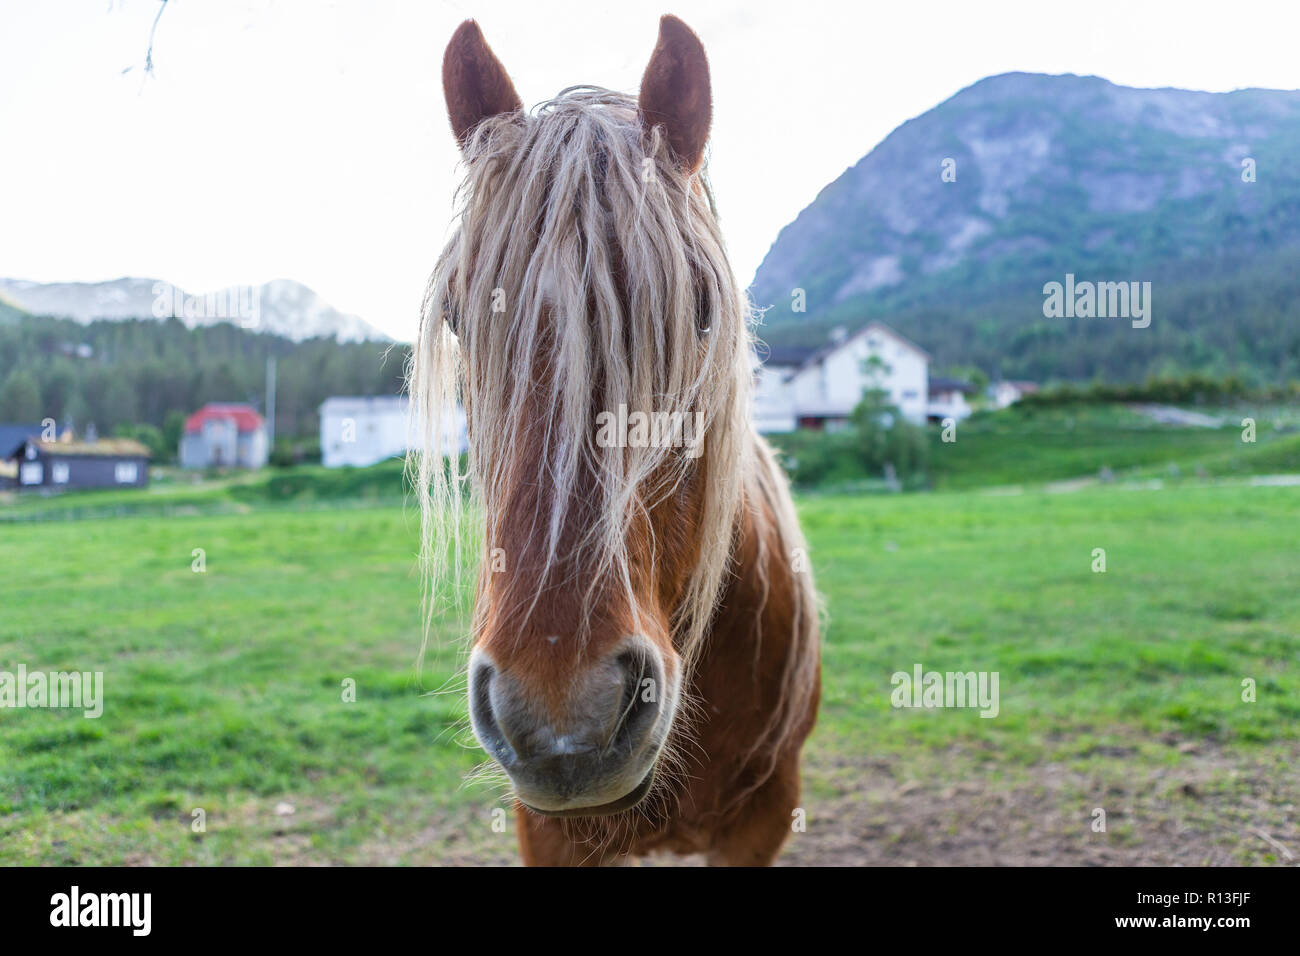 Funny looking horse with long hair. Stock Photo